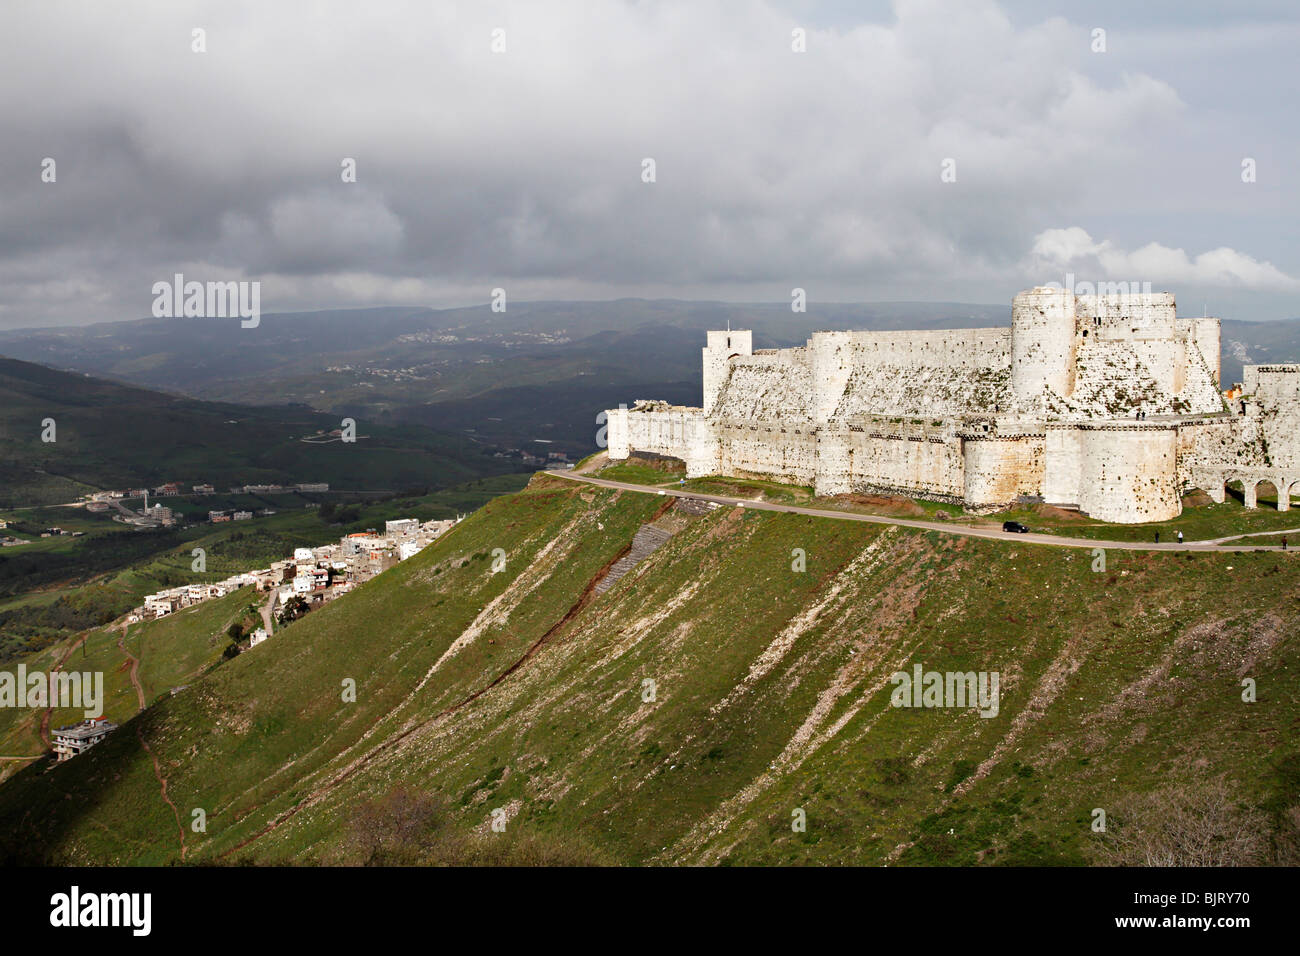 Krac Du Chevalier castle ( Castle of the knights) in Homs Governorate, Syria. Stock Photo